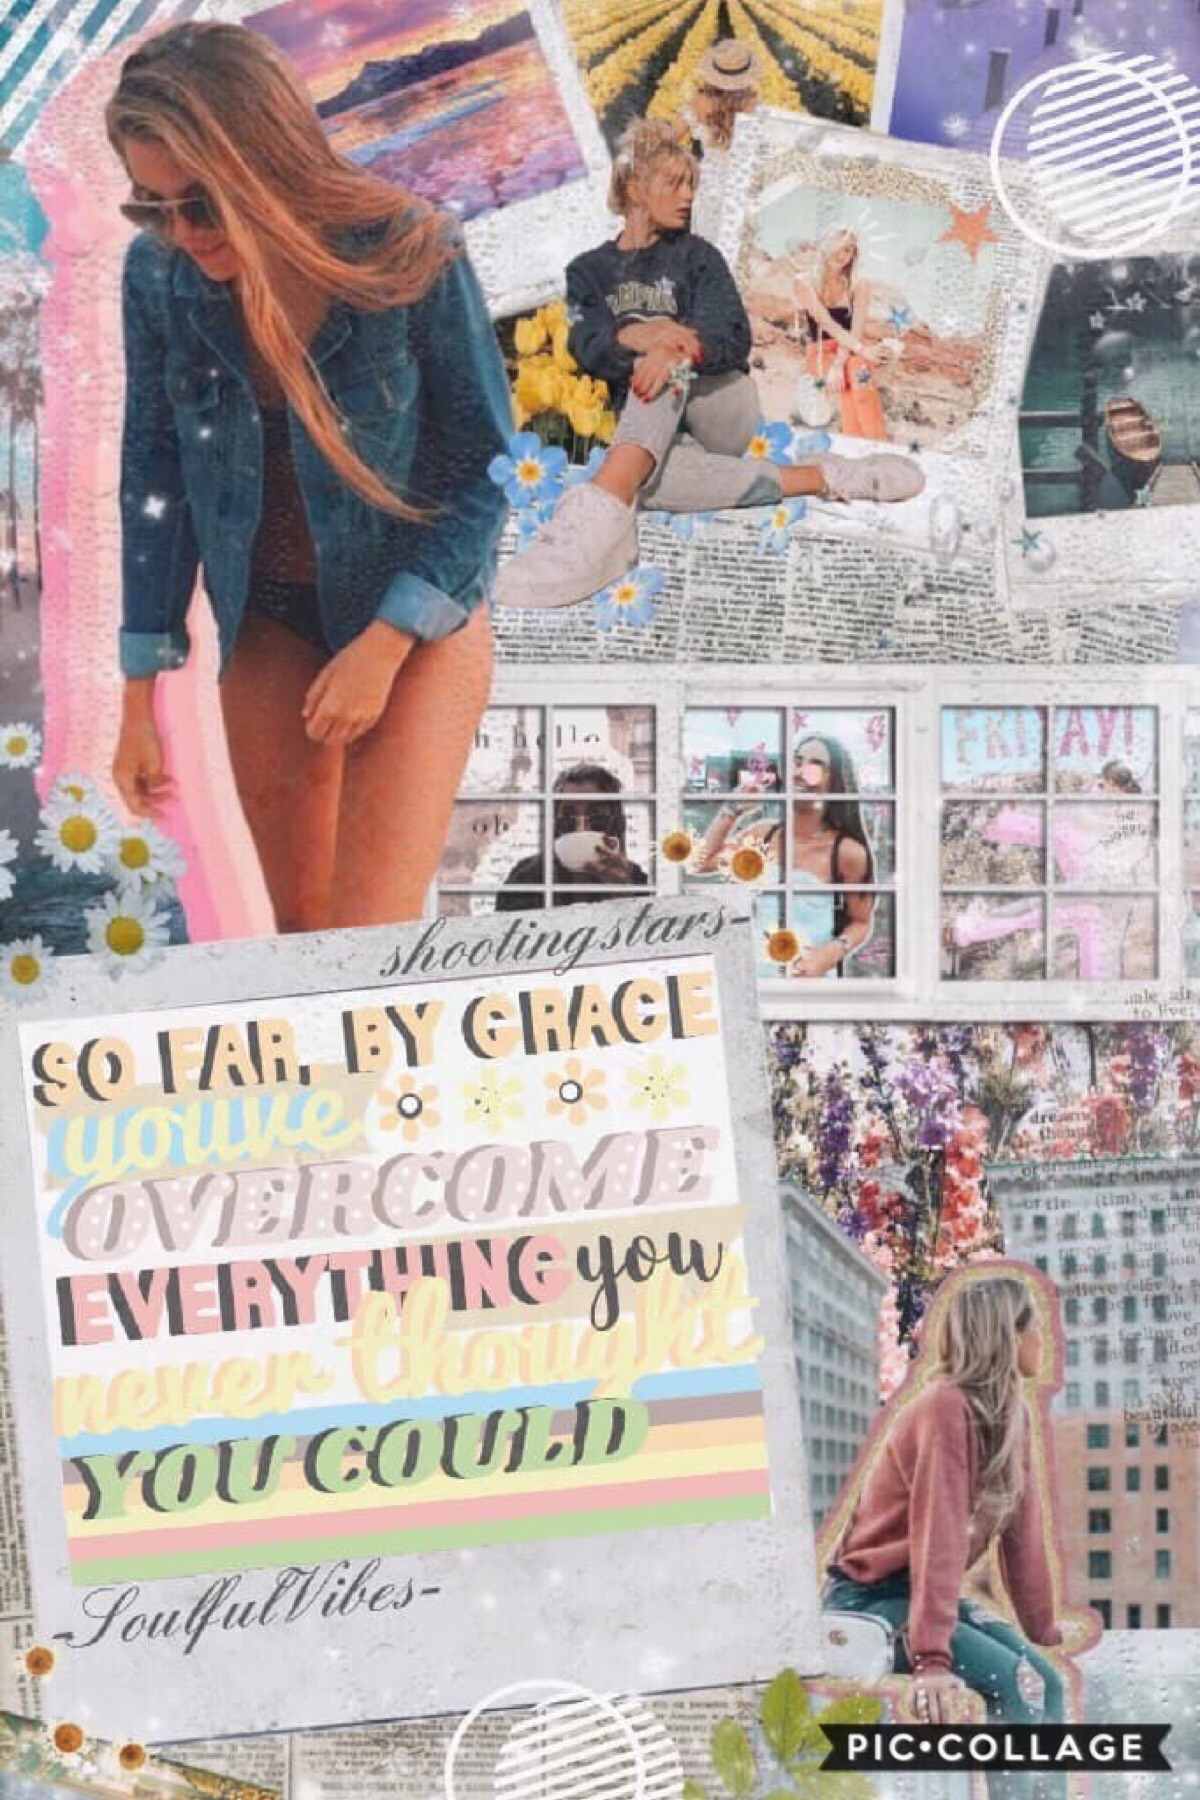 collab with the awesome Becca @_serein_💓🌸y’all should go follow her, she did the text I did the background🌼🌻what season is it rn in your country?✨💫☀️it’s summatime for me🌿🌺 omg I cut my foot so hard a few days ago and it hurts😂